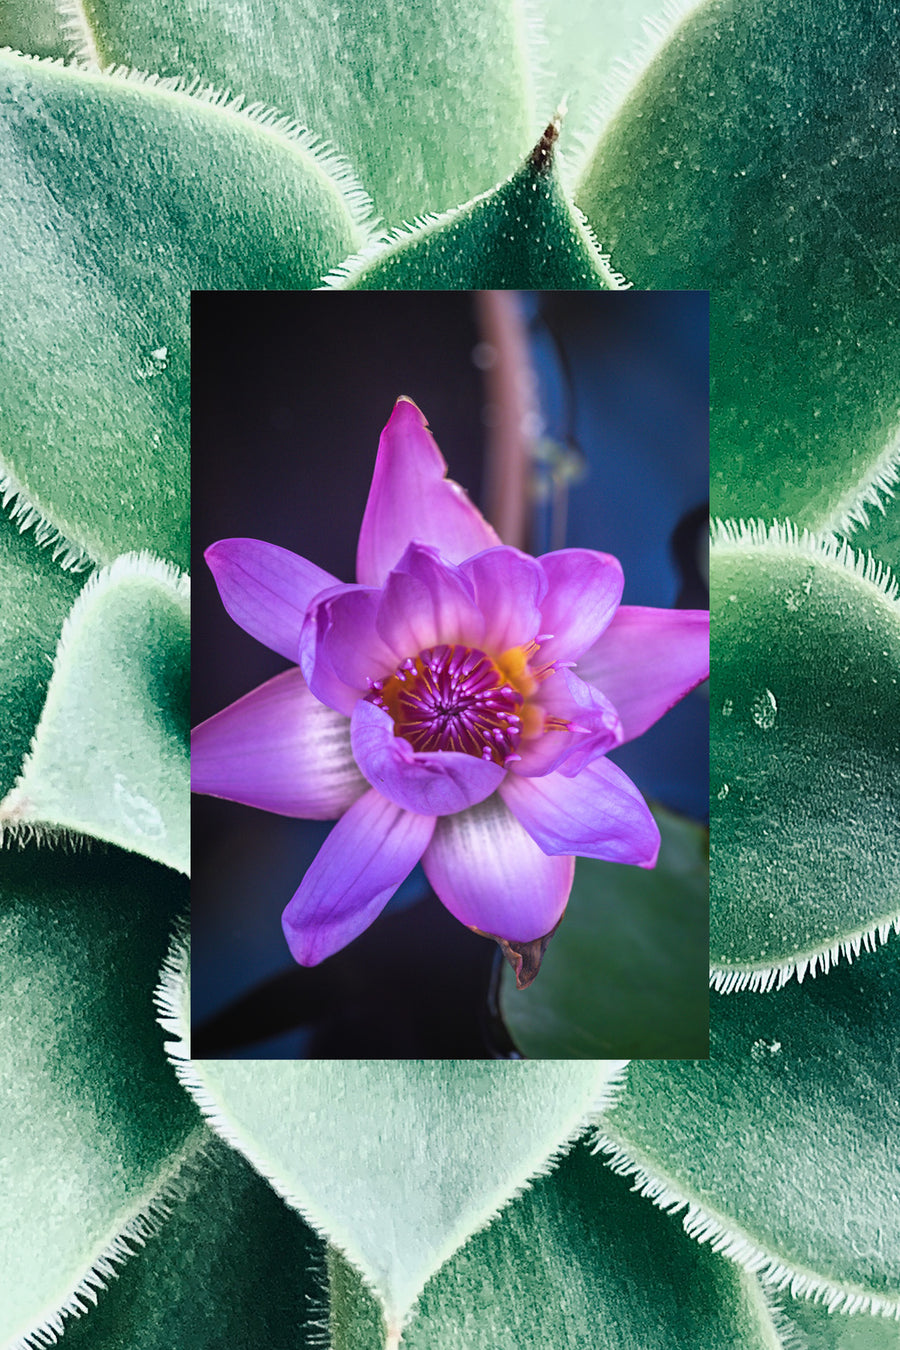 clean ingredient image waterlily and cactus